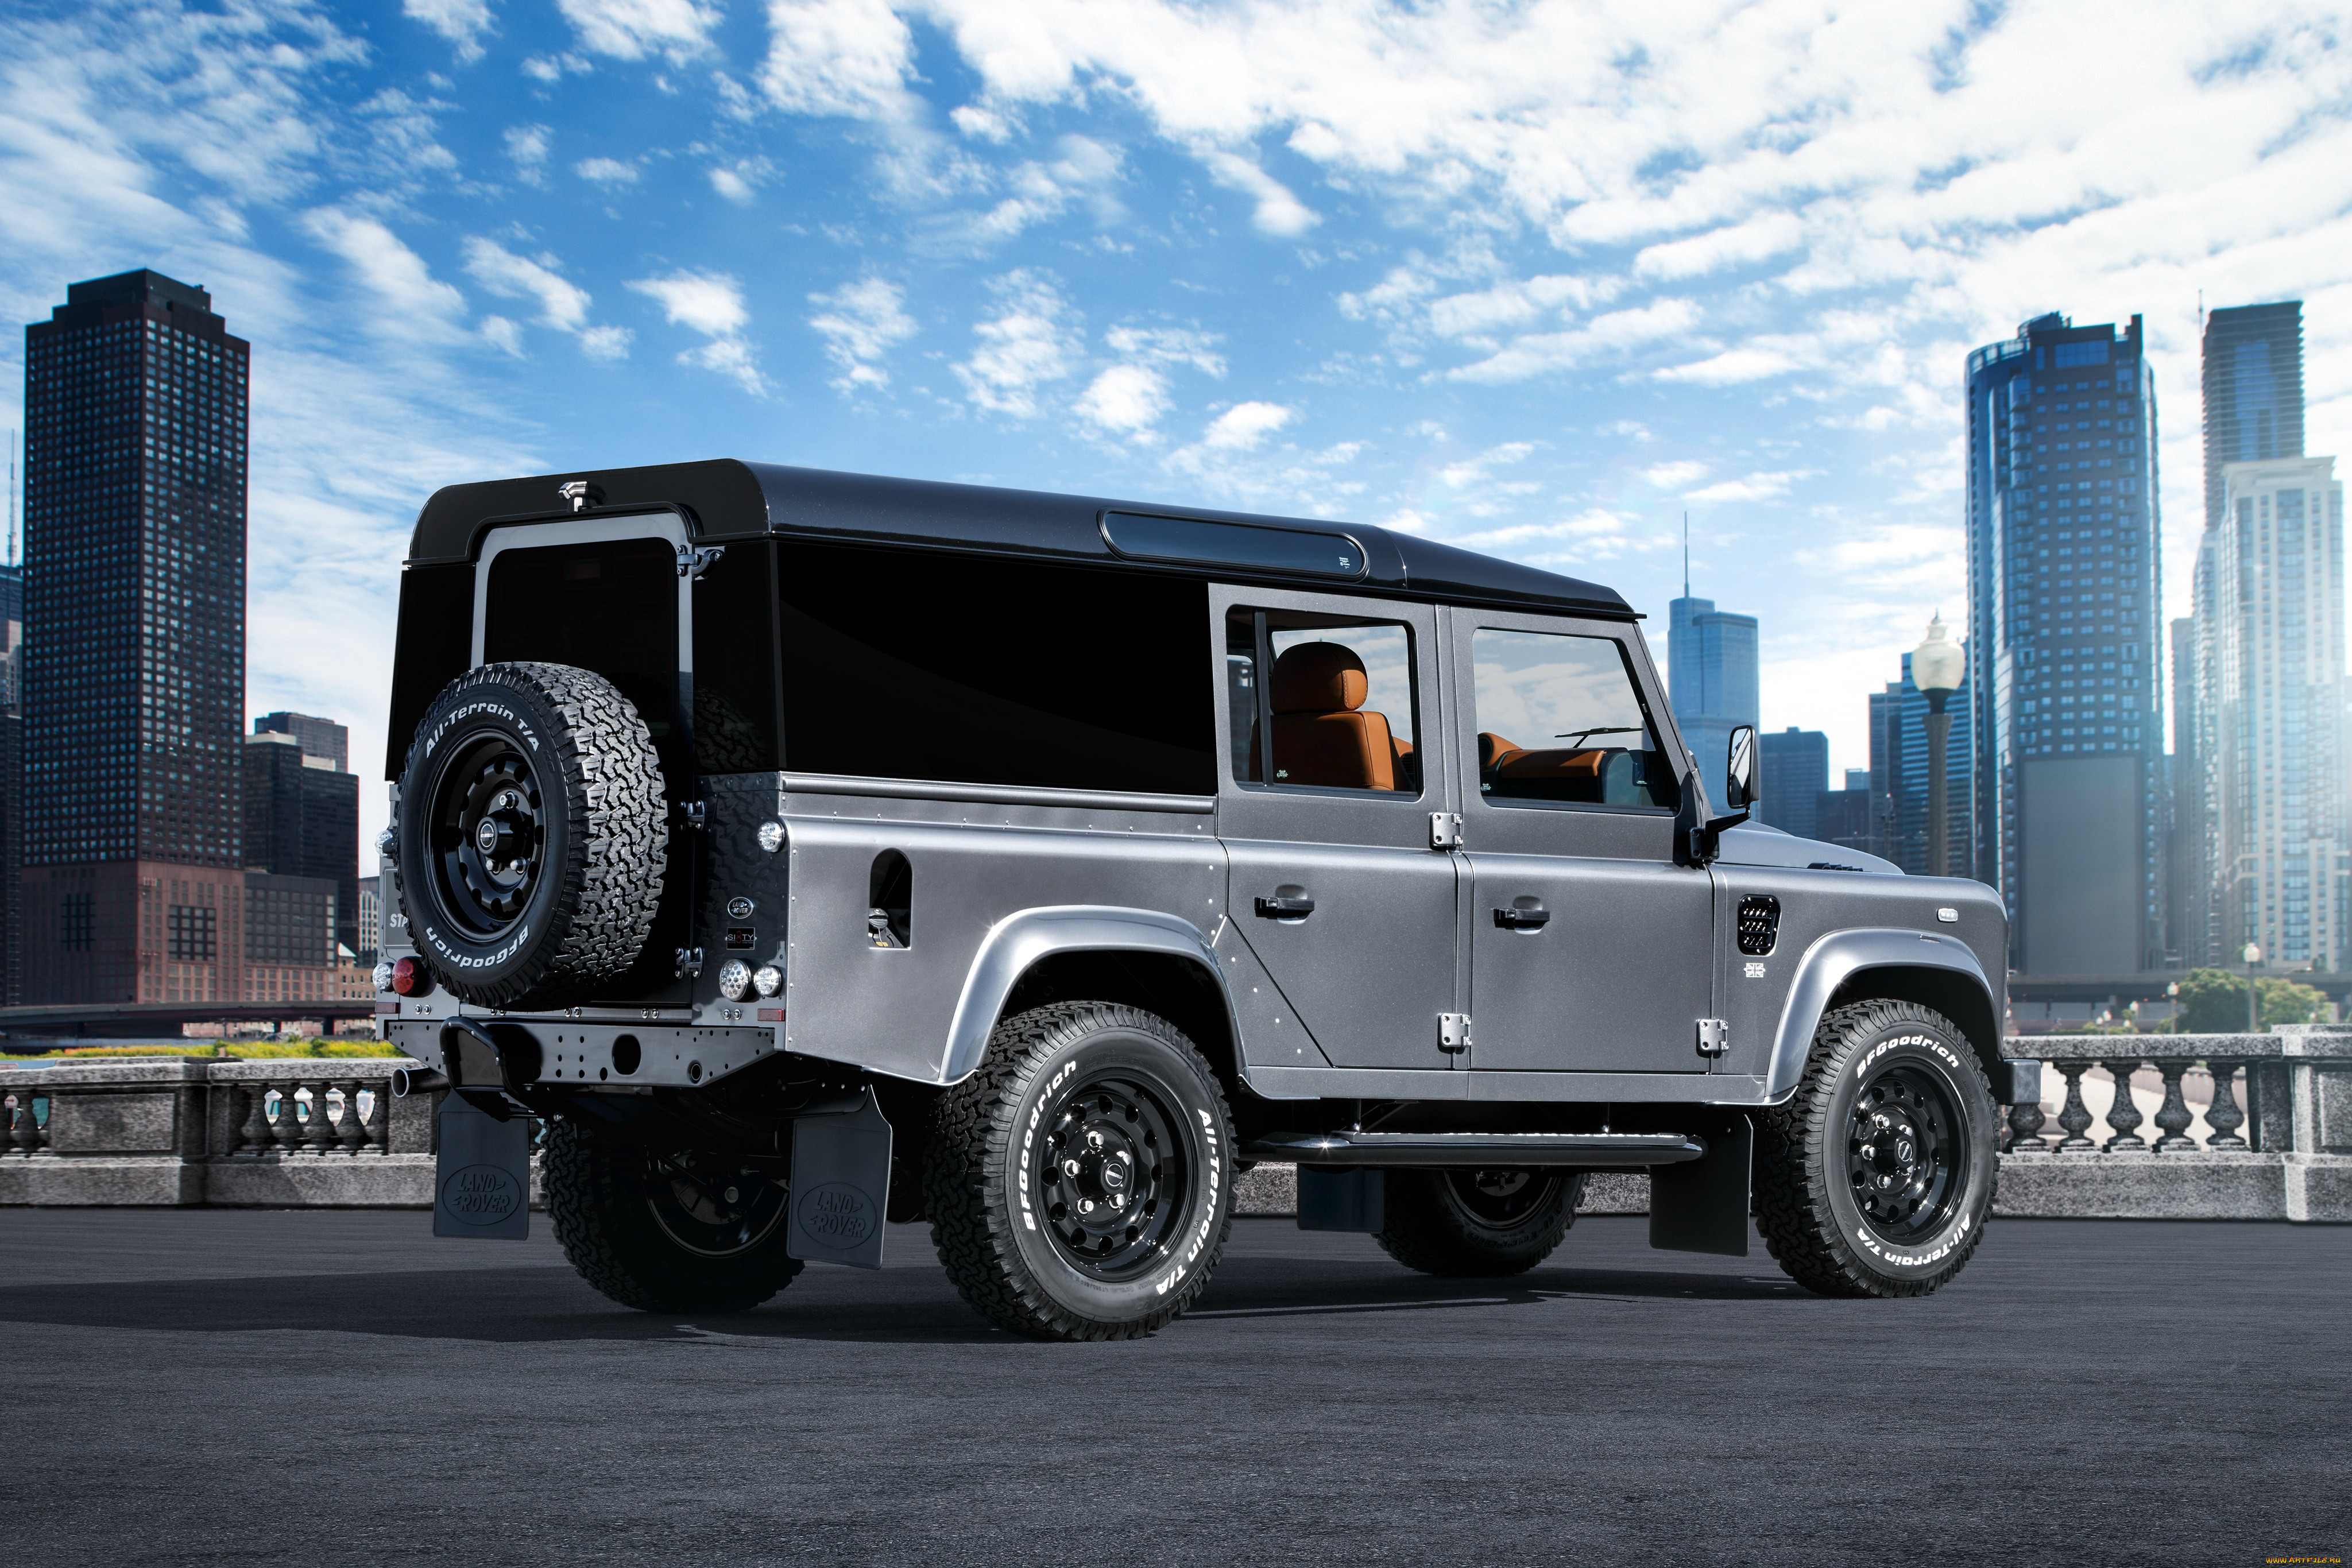 , land-rover, 2015, sixty8, defender, 110, rover, land, startech